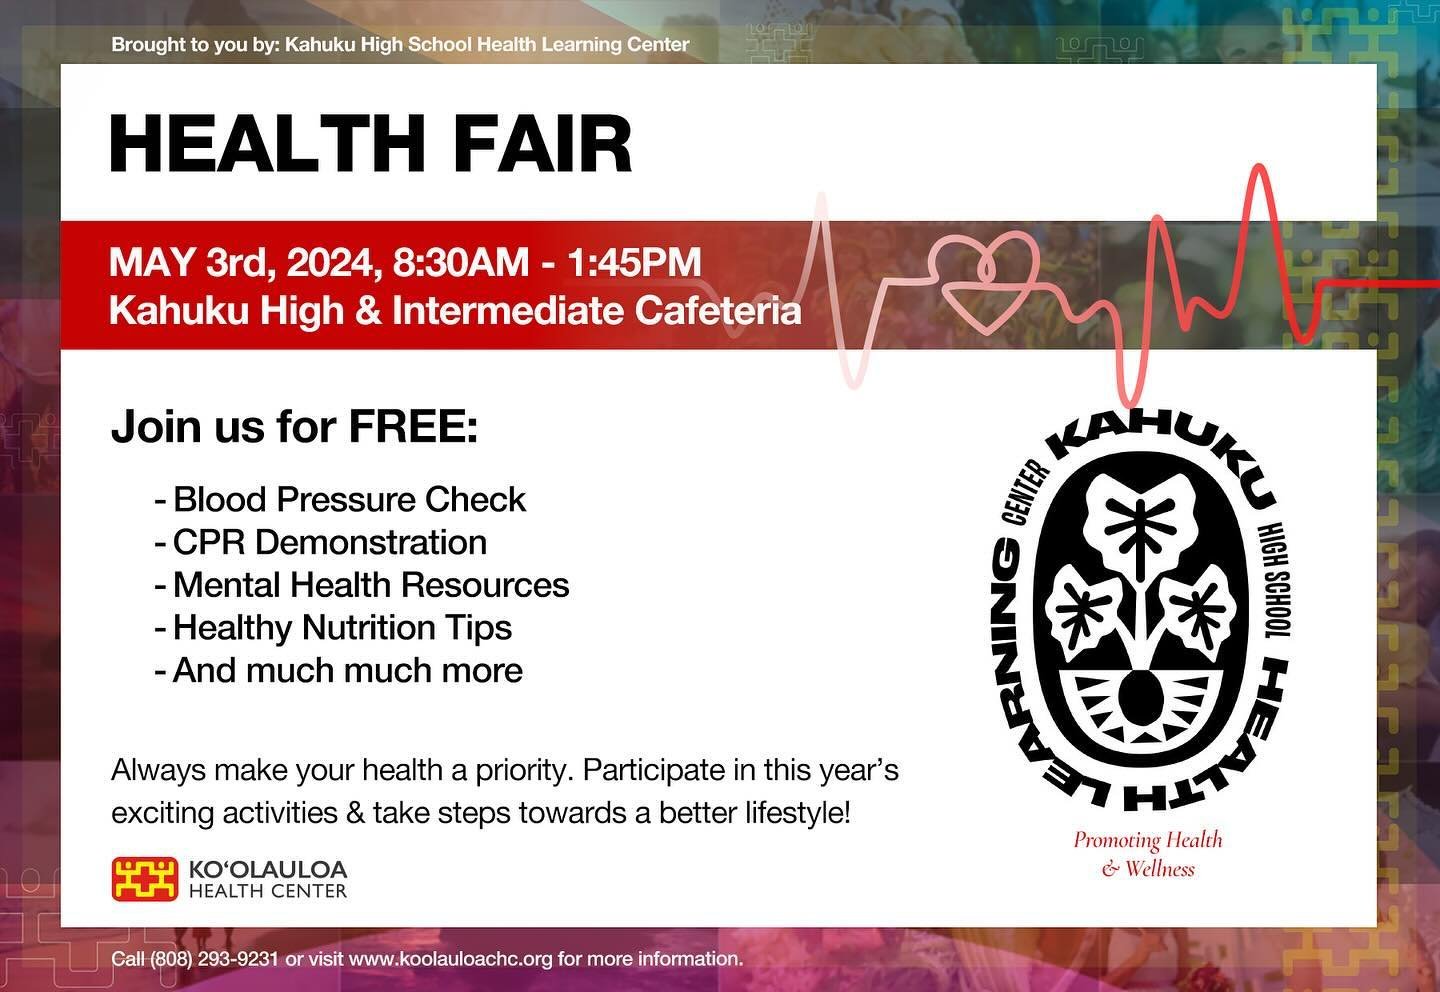 Aloha &lsquo;Ohana!

PSA: the Kahuku High School Health Learning Center&rsquo;s 2024 Health Fair is on May 3rd, between 8:30 am - 1:45 pm. Join the staff from Ko&rsquo;olauloa Health Center and many others for free blood pressure checks, CPR demonstr